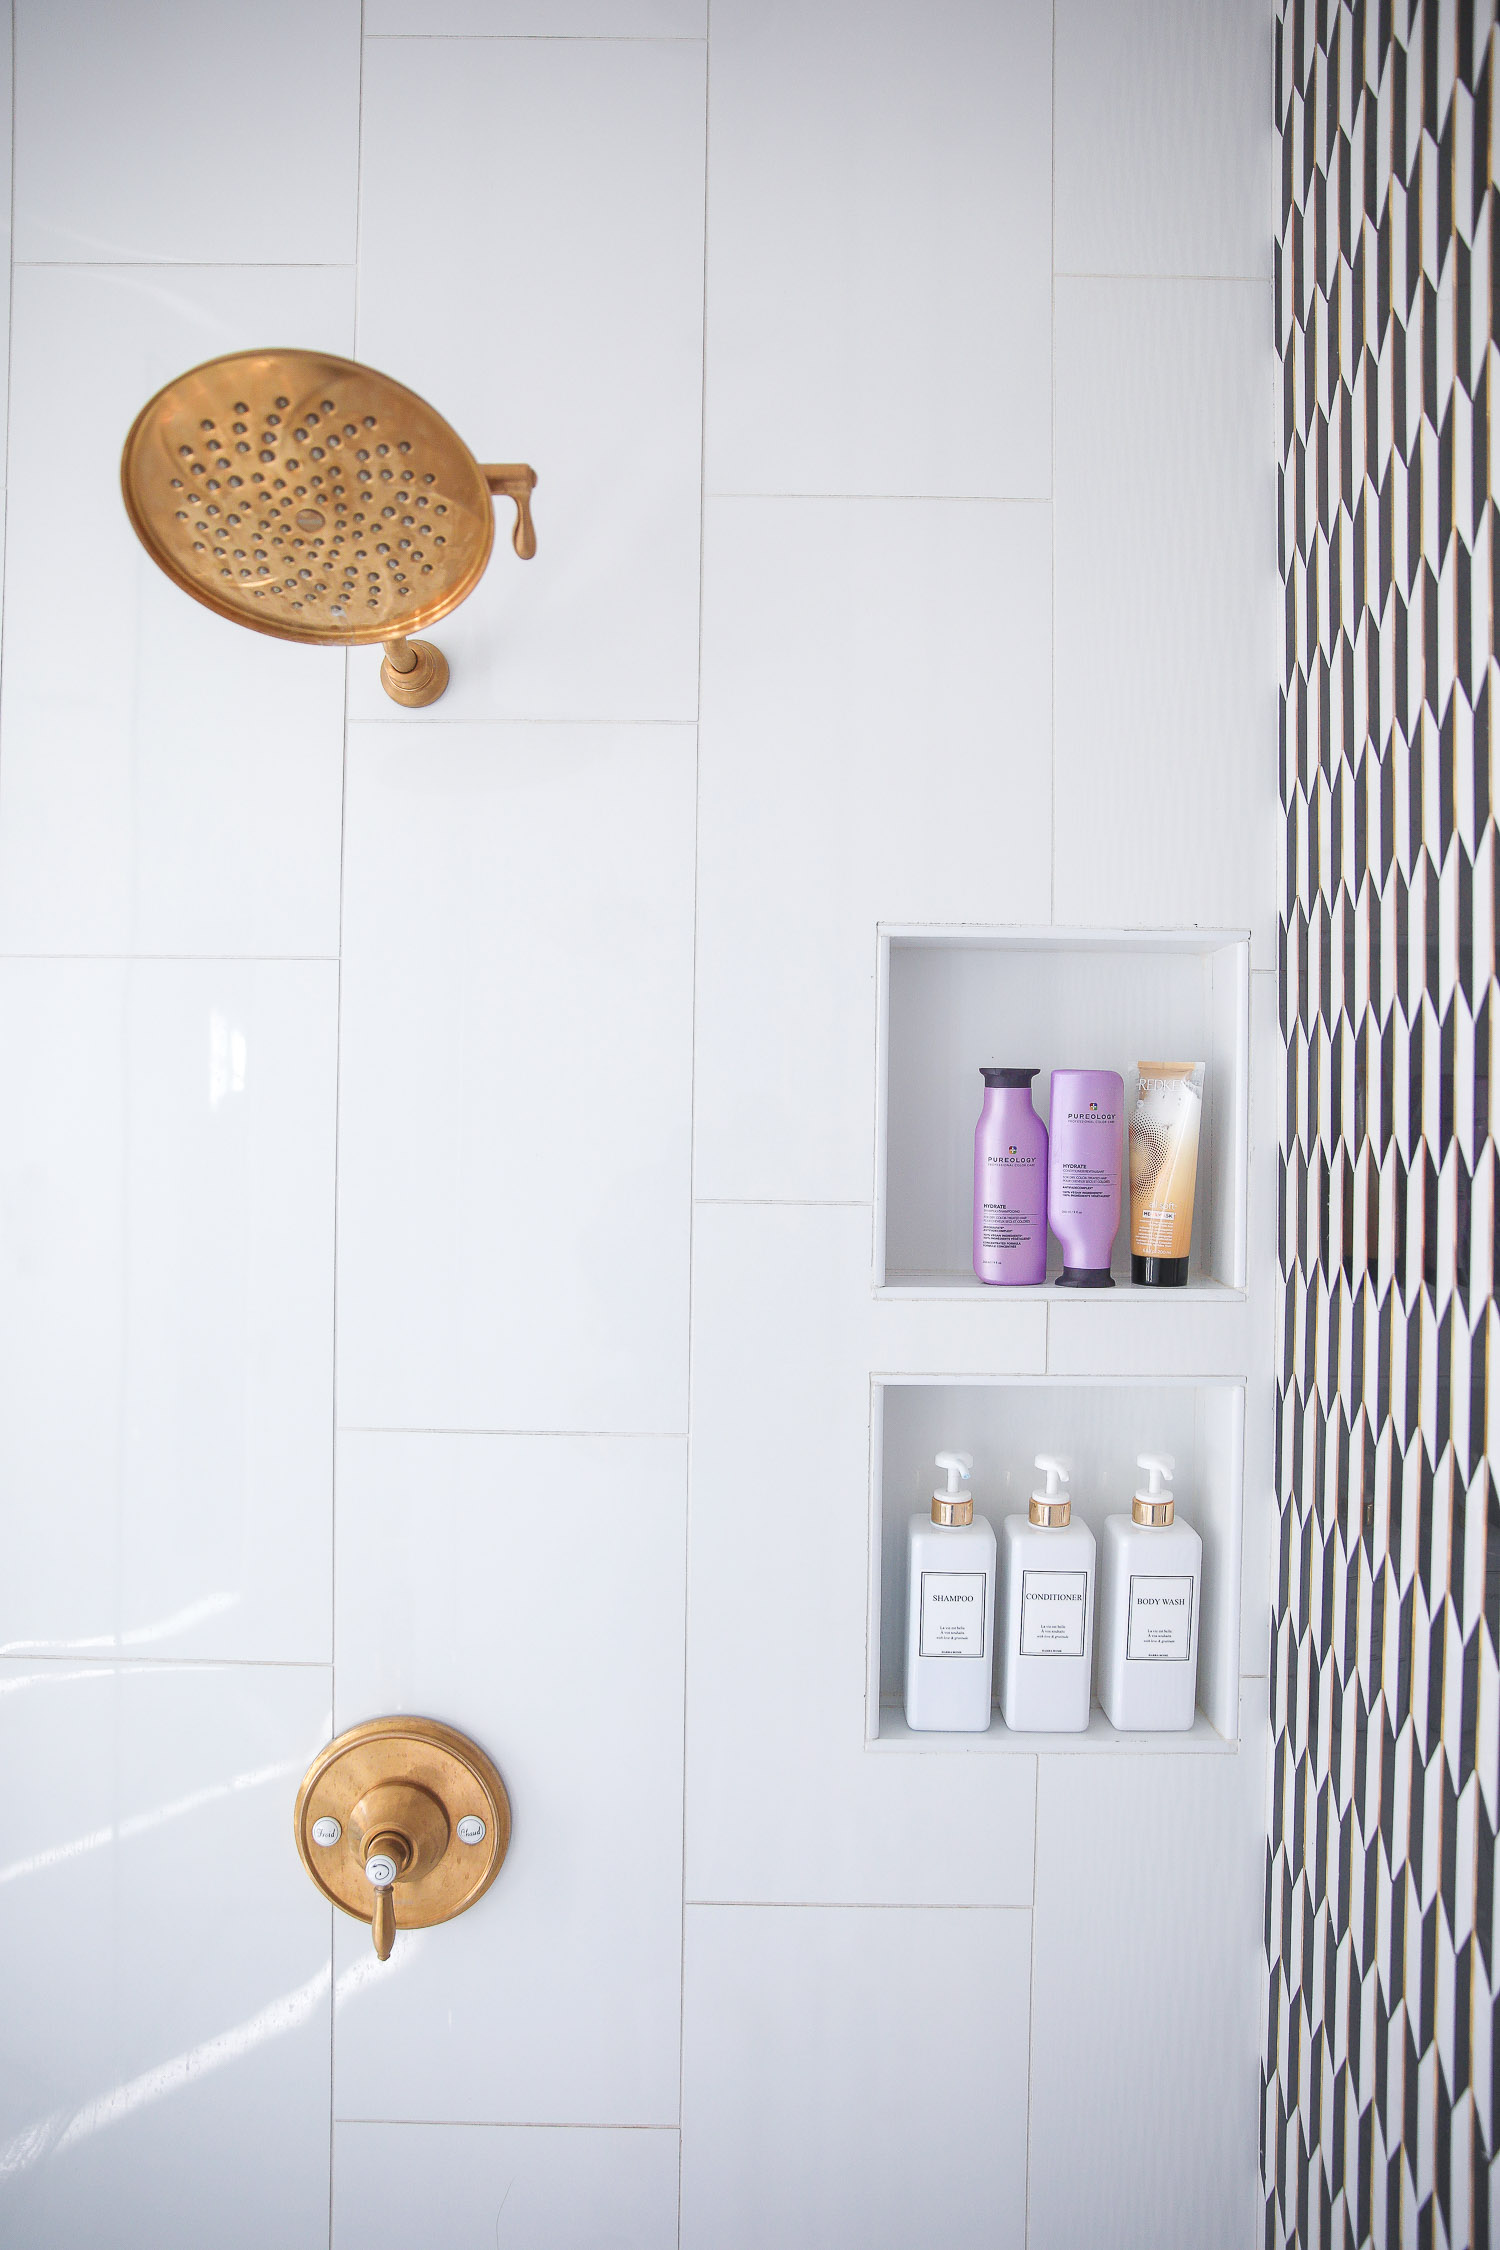 hair dot com, best hair products for long hair and extensions, Purology shampoo and conditioner, emily gemma, the sweetest thing blog |Hair Products by popular US beauty blog, The Sweetest Thing: image of a walk-in shower stocked with Pureology and Dae hair products. 